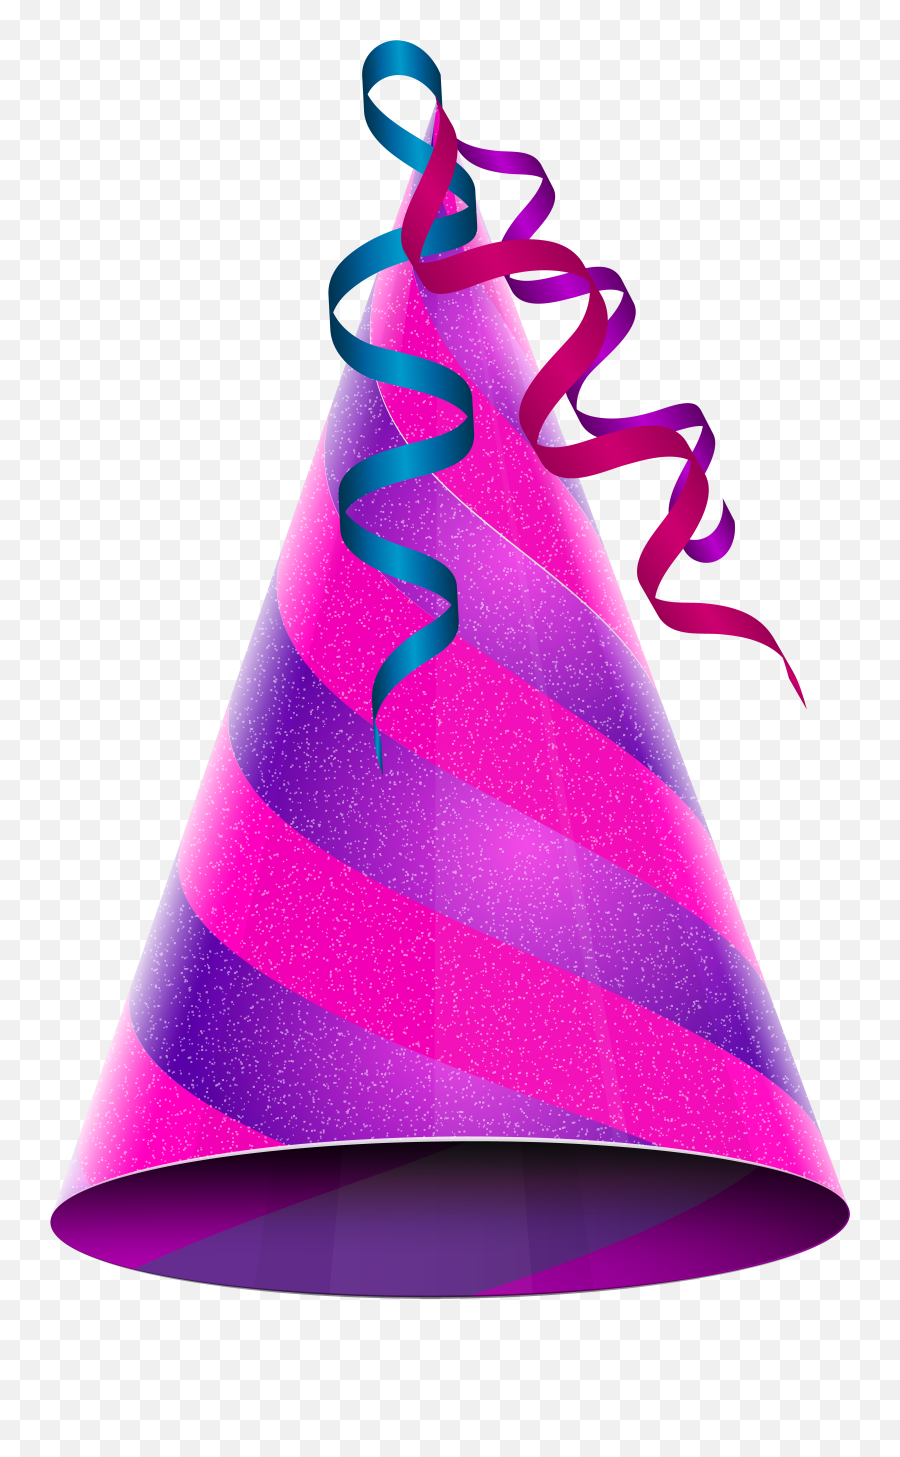 Party Birthday Hat Png - Purple Pink Party Hat Emoji,Free Dunce Cap Emoticon